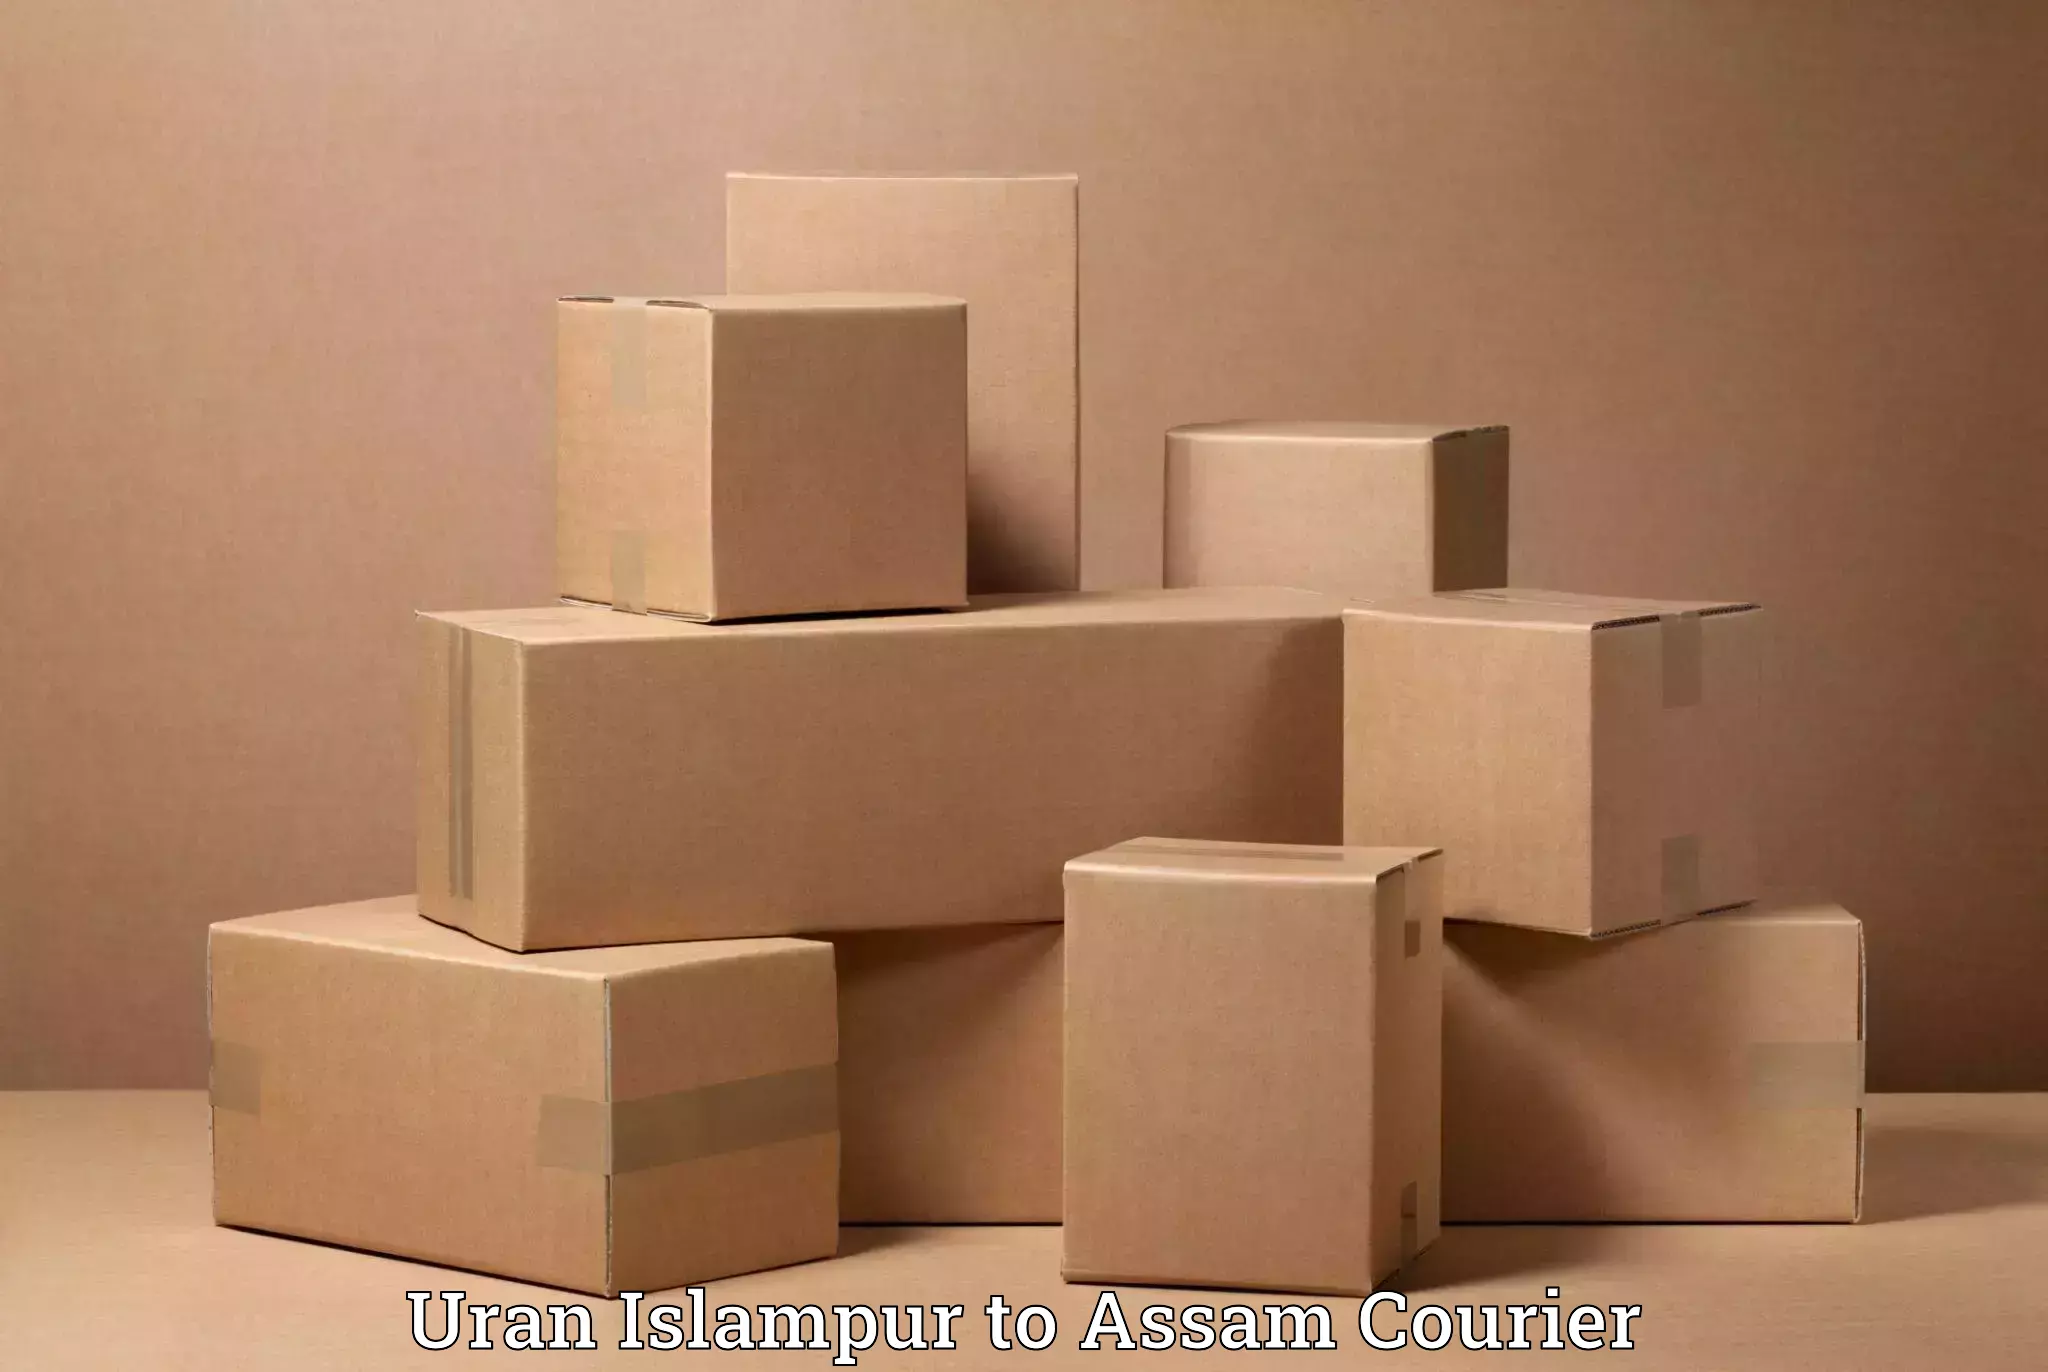 Moving and storage services Uran Islampur to Assam